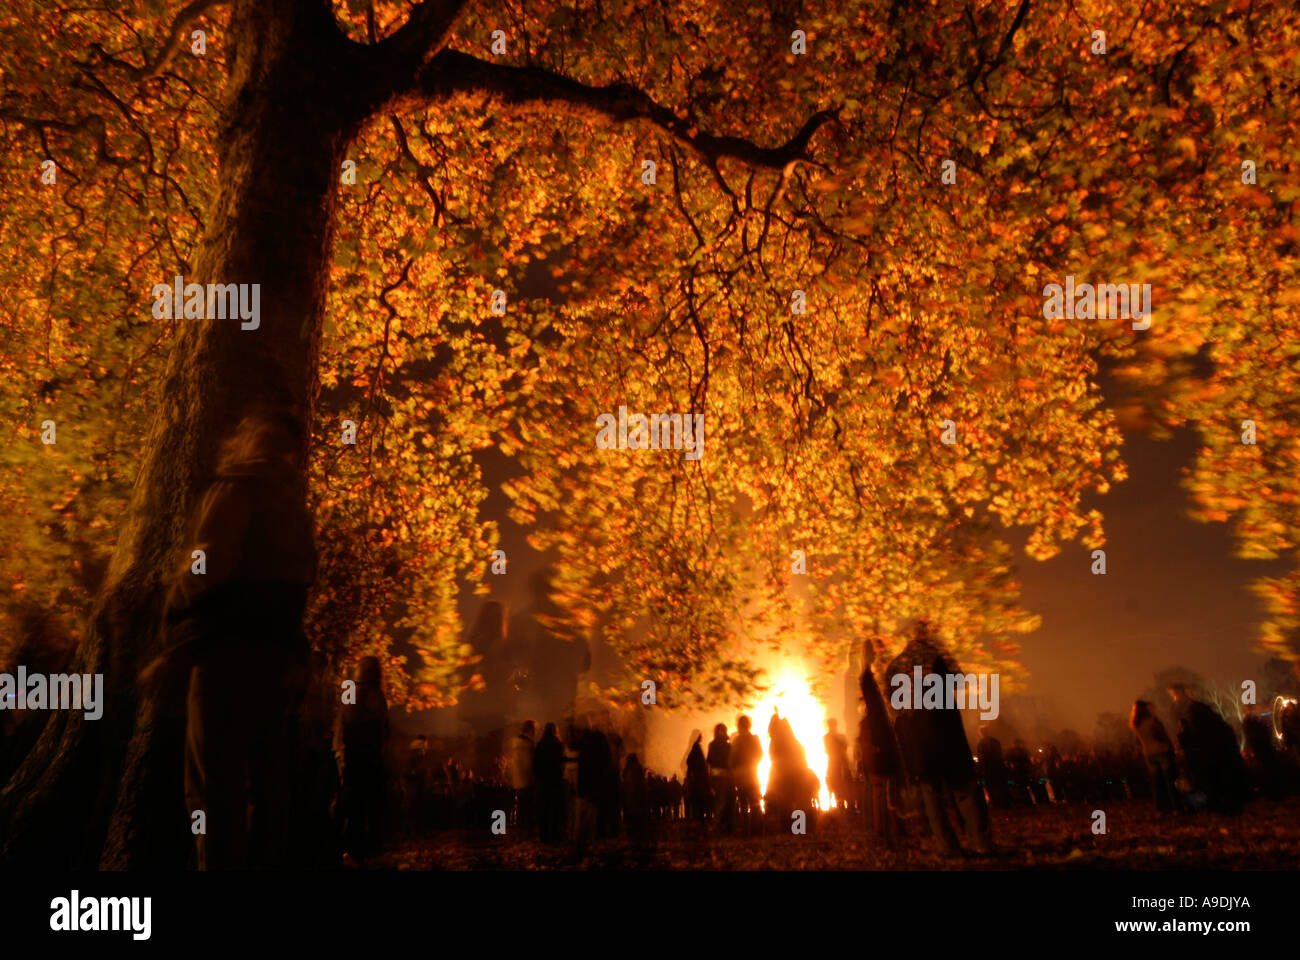 People watching a Guy Fawkes night bonfire Stock Photo